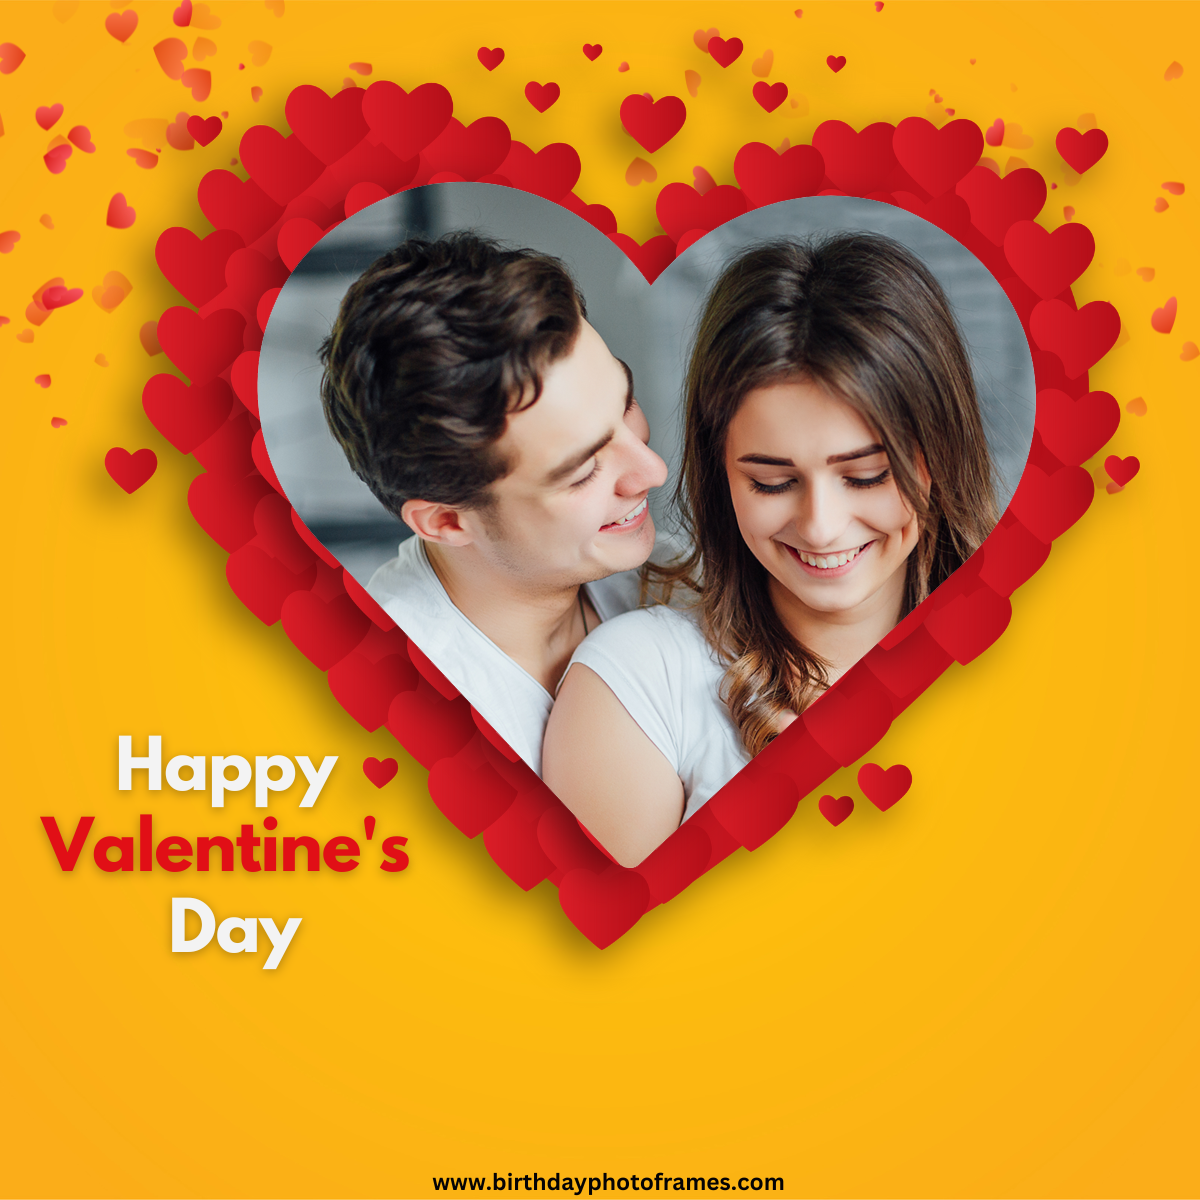 Create a Personalized Valentines Day Greeting Card with Photo